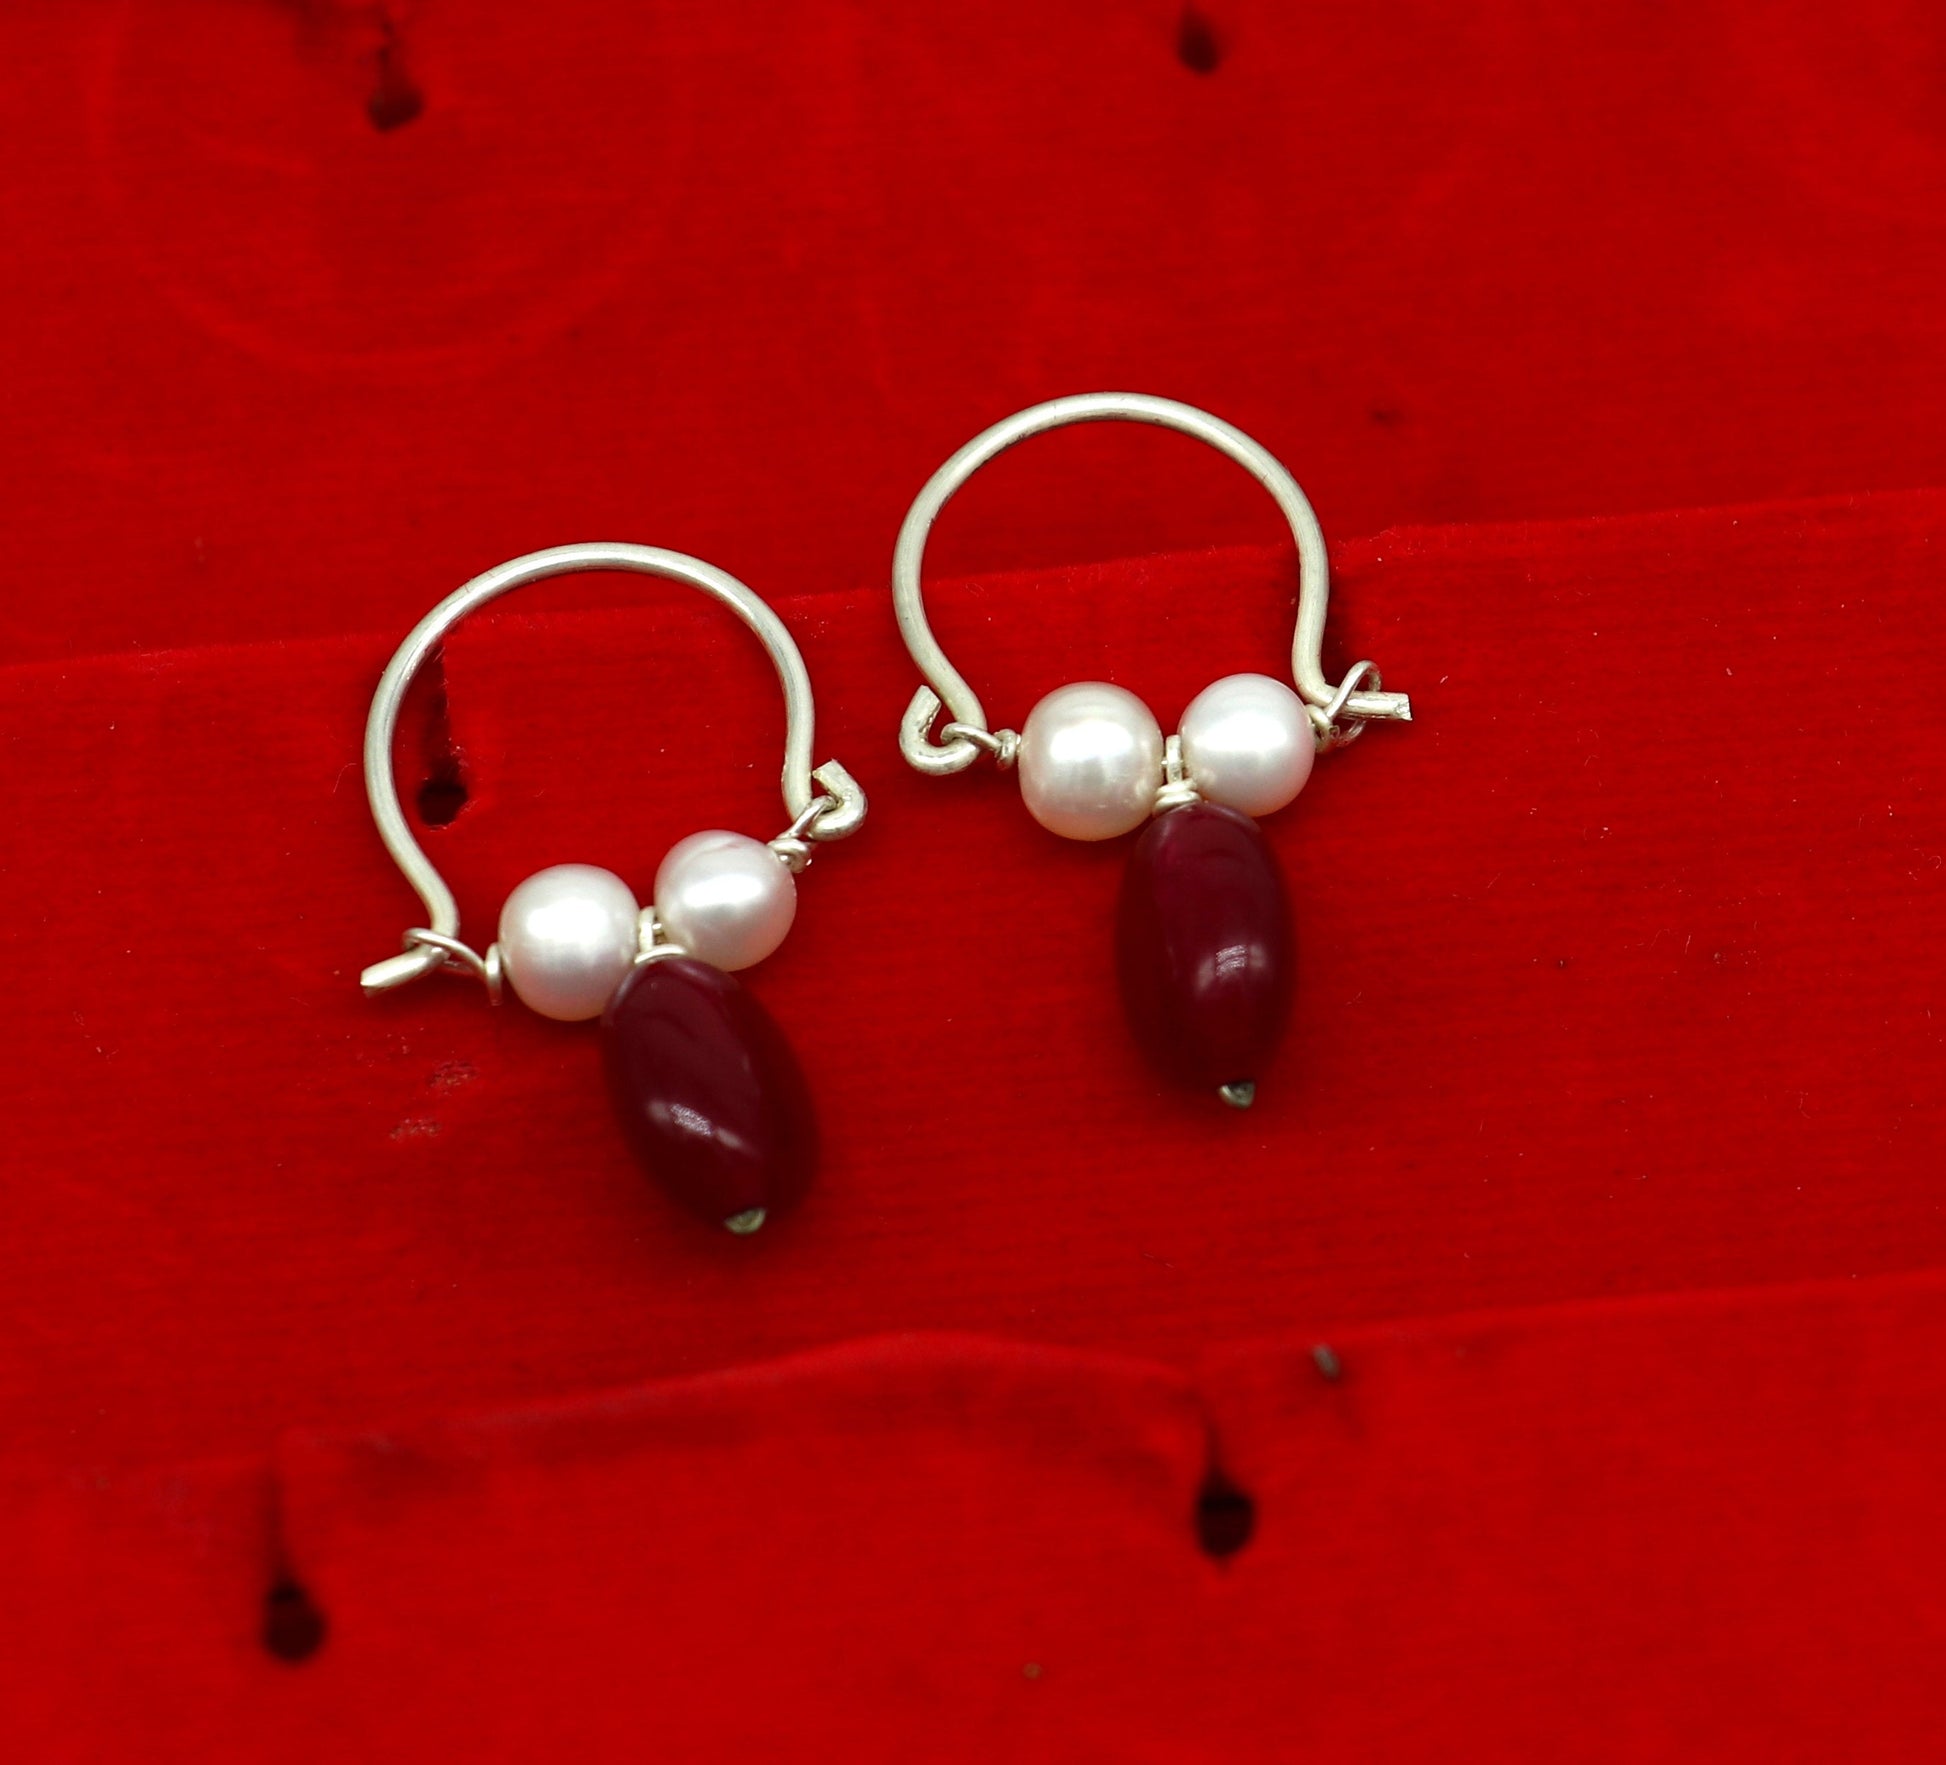 925 sterling silver custom made hoops earring, gorgeous hanging pearls drops hoops earring, stunning brides gifting jewelry s910 - TRIBAL ORNAMENTS